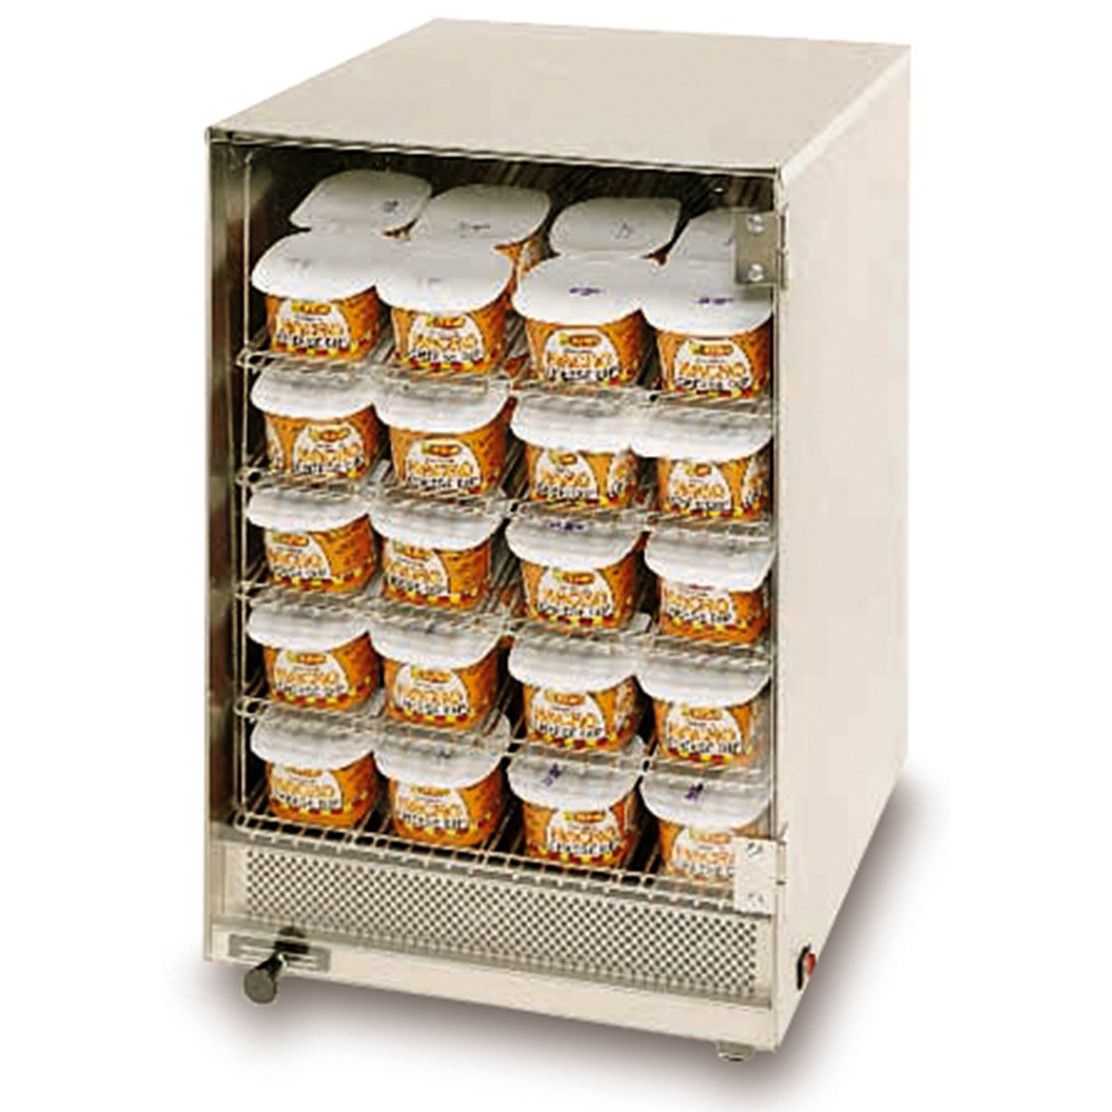 Gold Medal 4211C 27 1/4 Wide High-Output Twin Warmer / Server For Nacho  Cheese / Chocolate / Caramel Apple Dip, 120V 1440 Watts